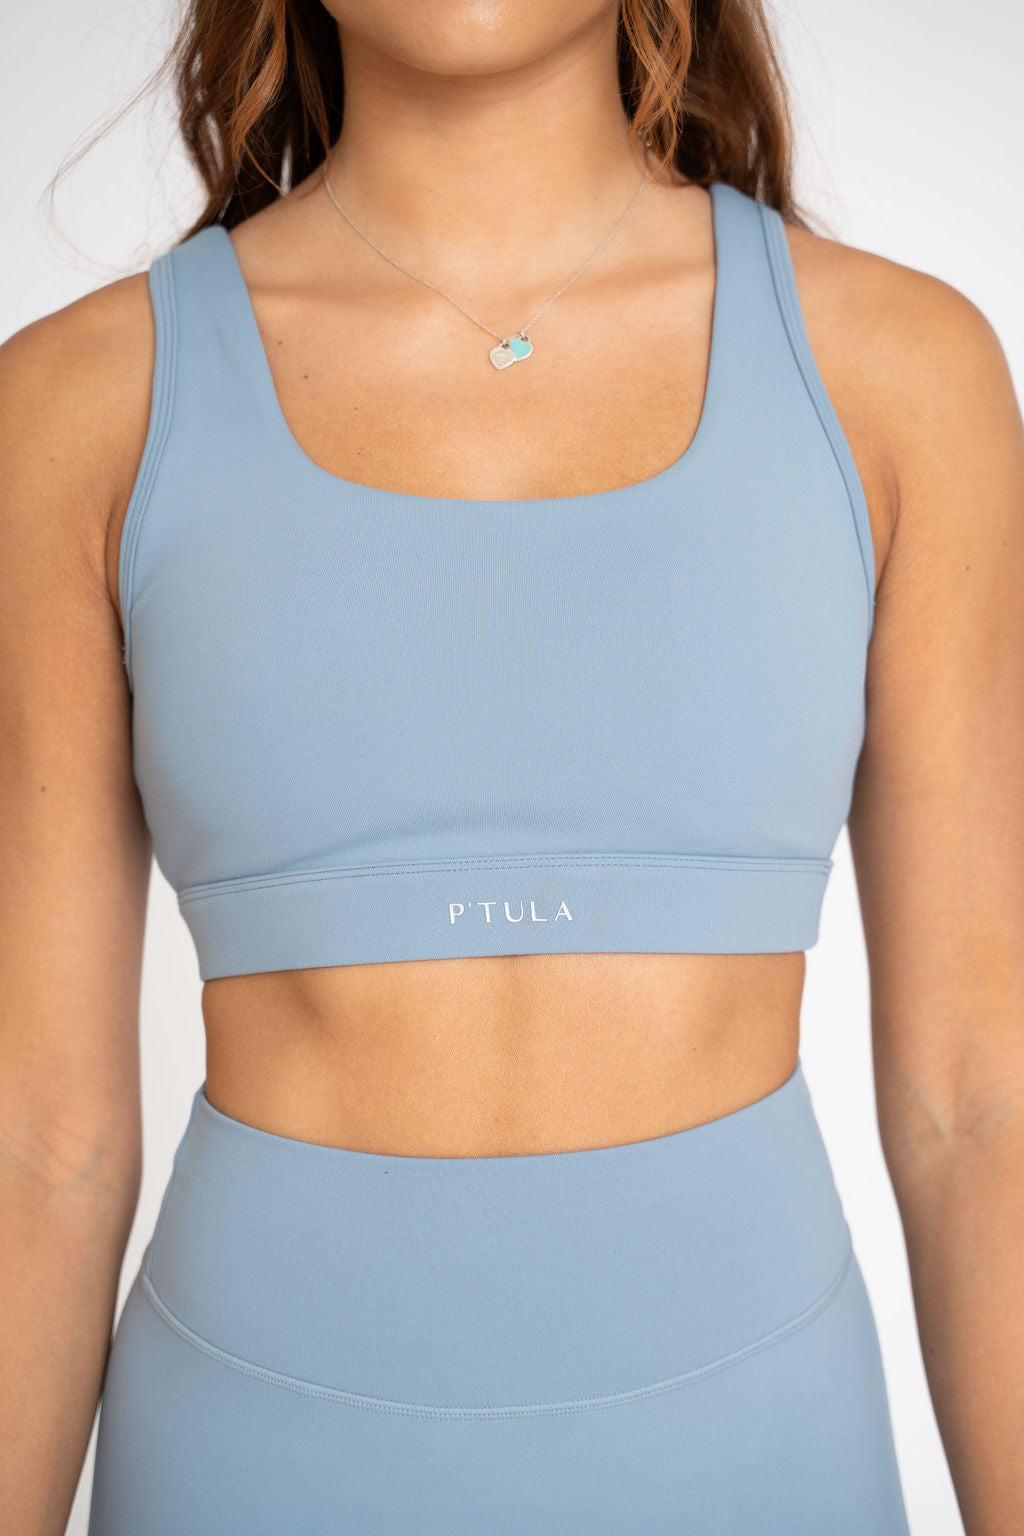 Buy Supportive Sports Bra Online At Aquilla